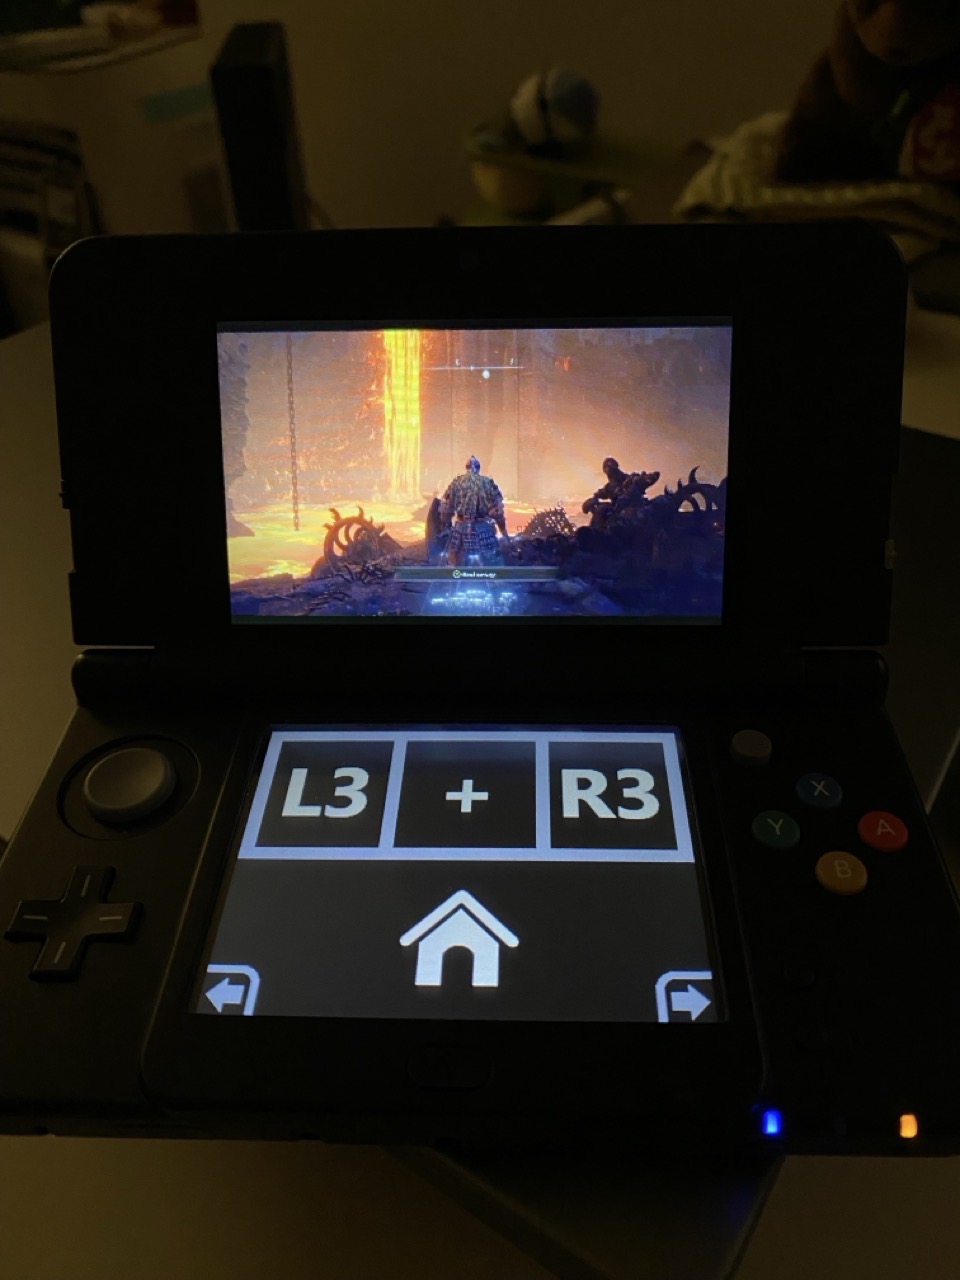 A photo of Elden Ring being streamed to a 3DS via Moonlight.